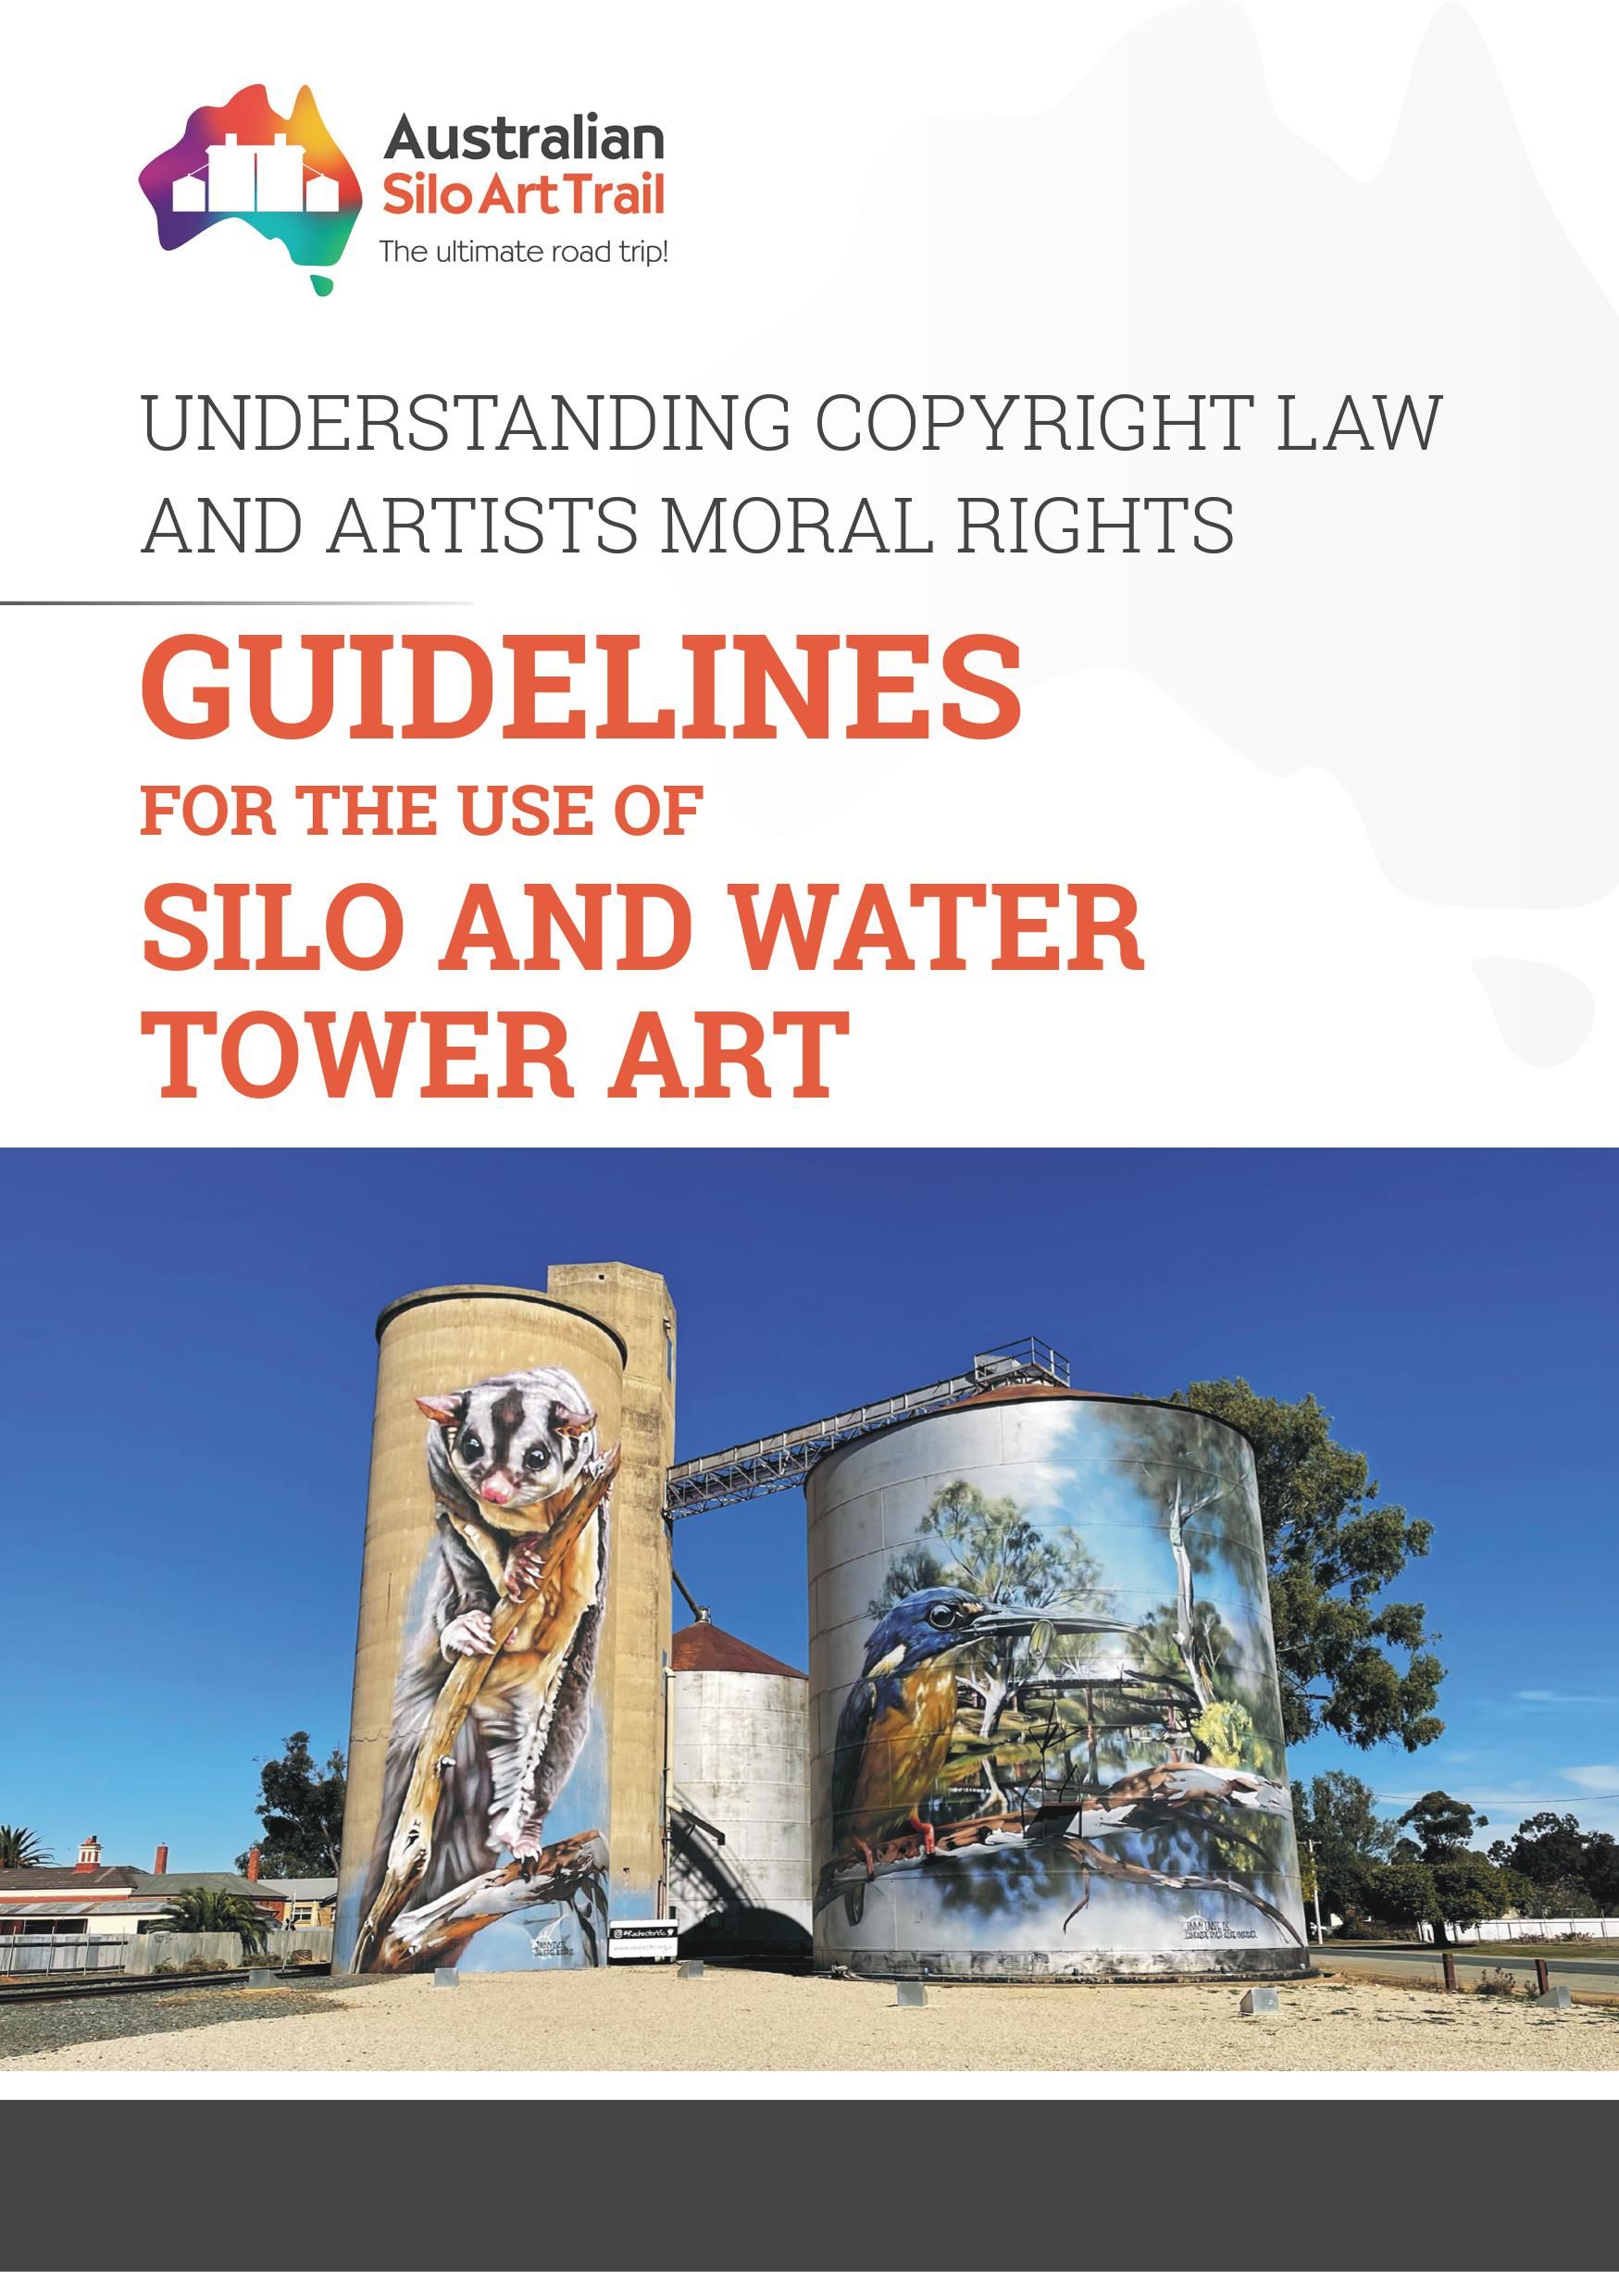 Guidelines for copyright law